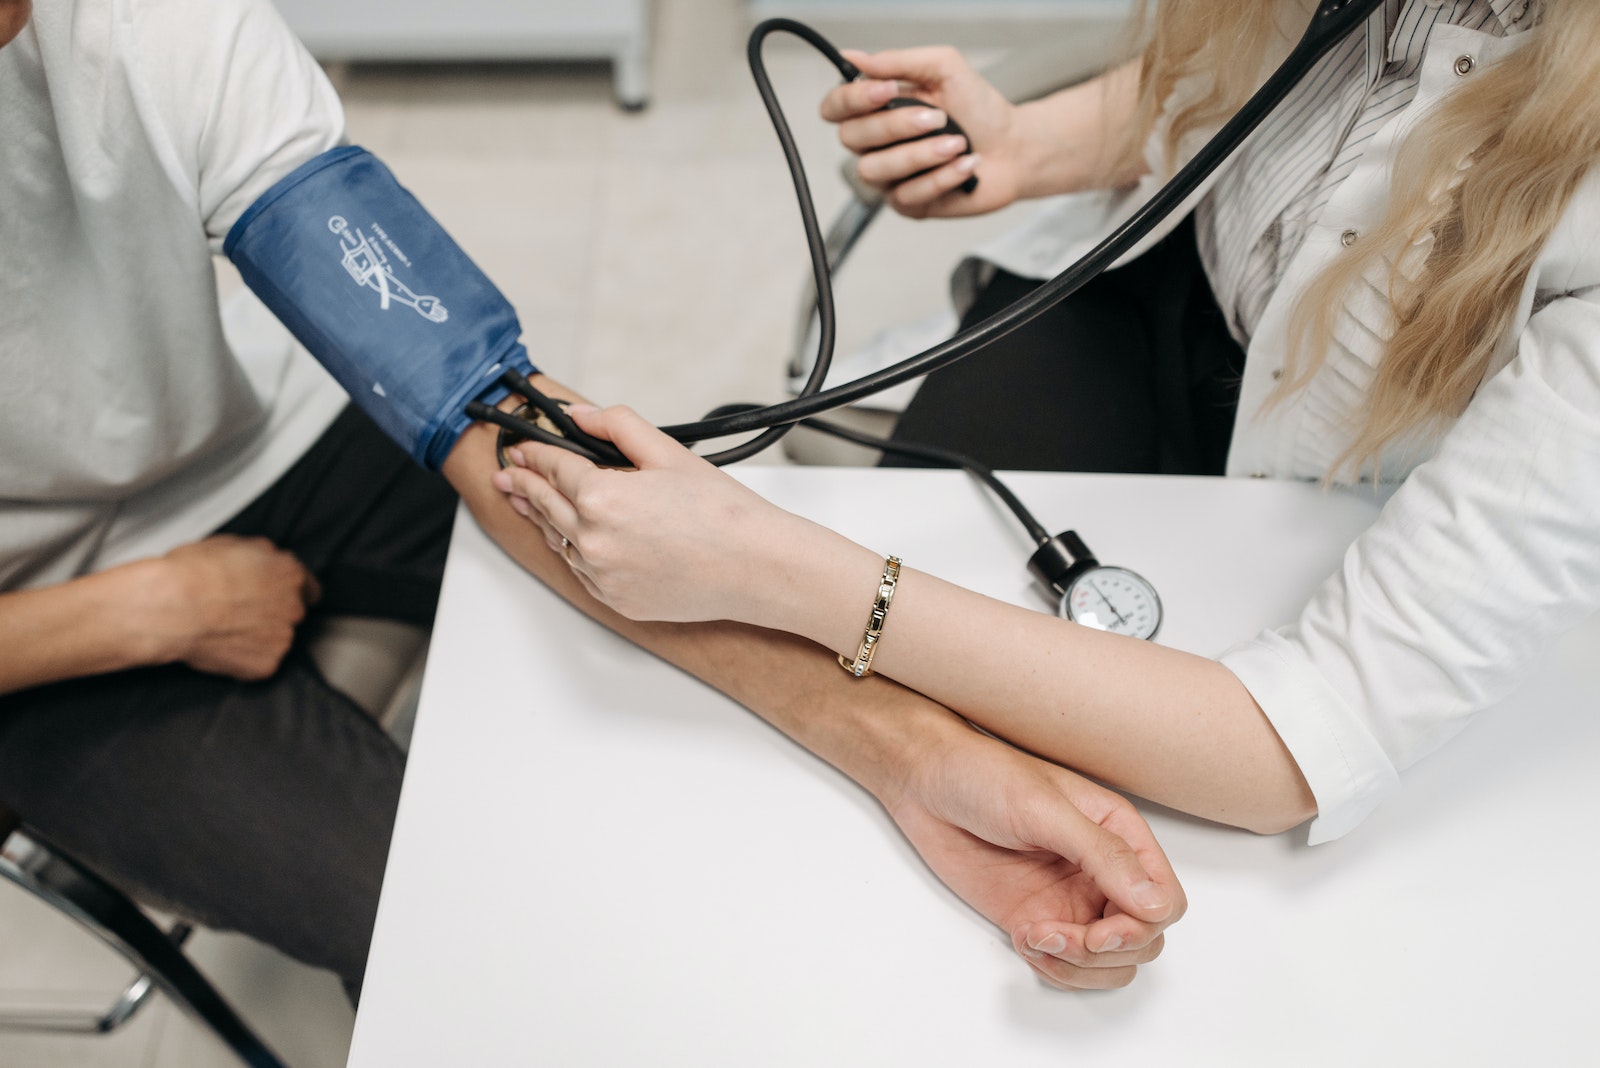 A Healthcare Worker Measuring a Patient's Blood Pressure Using a Sphygmomanometer